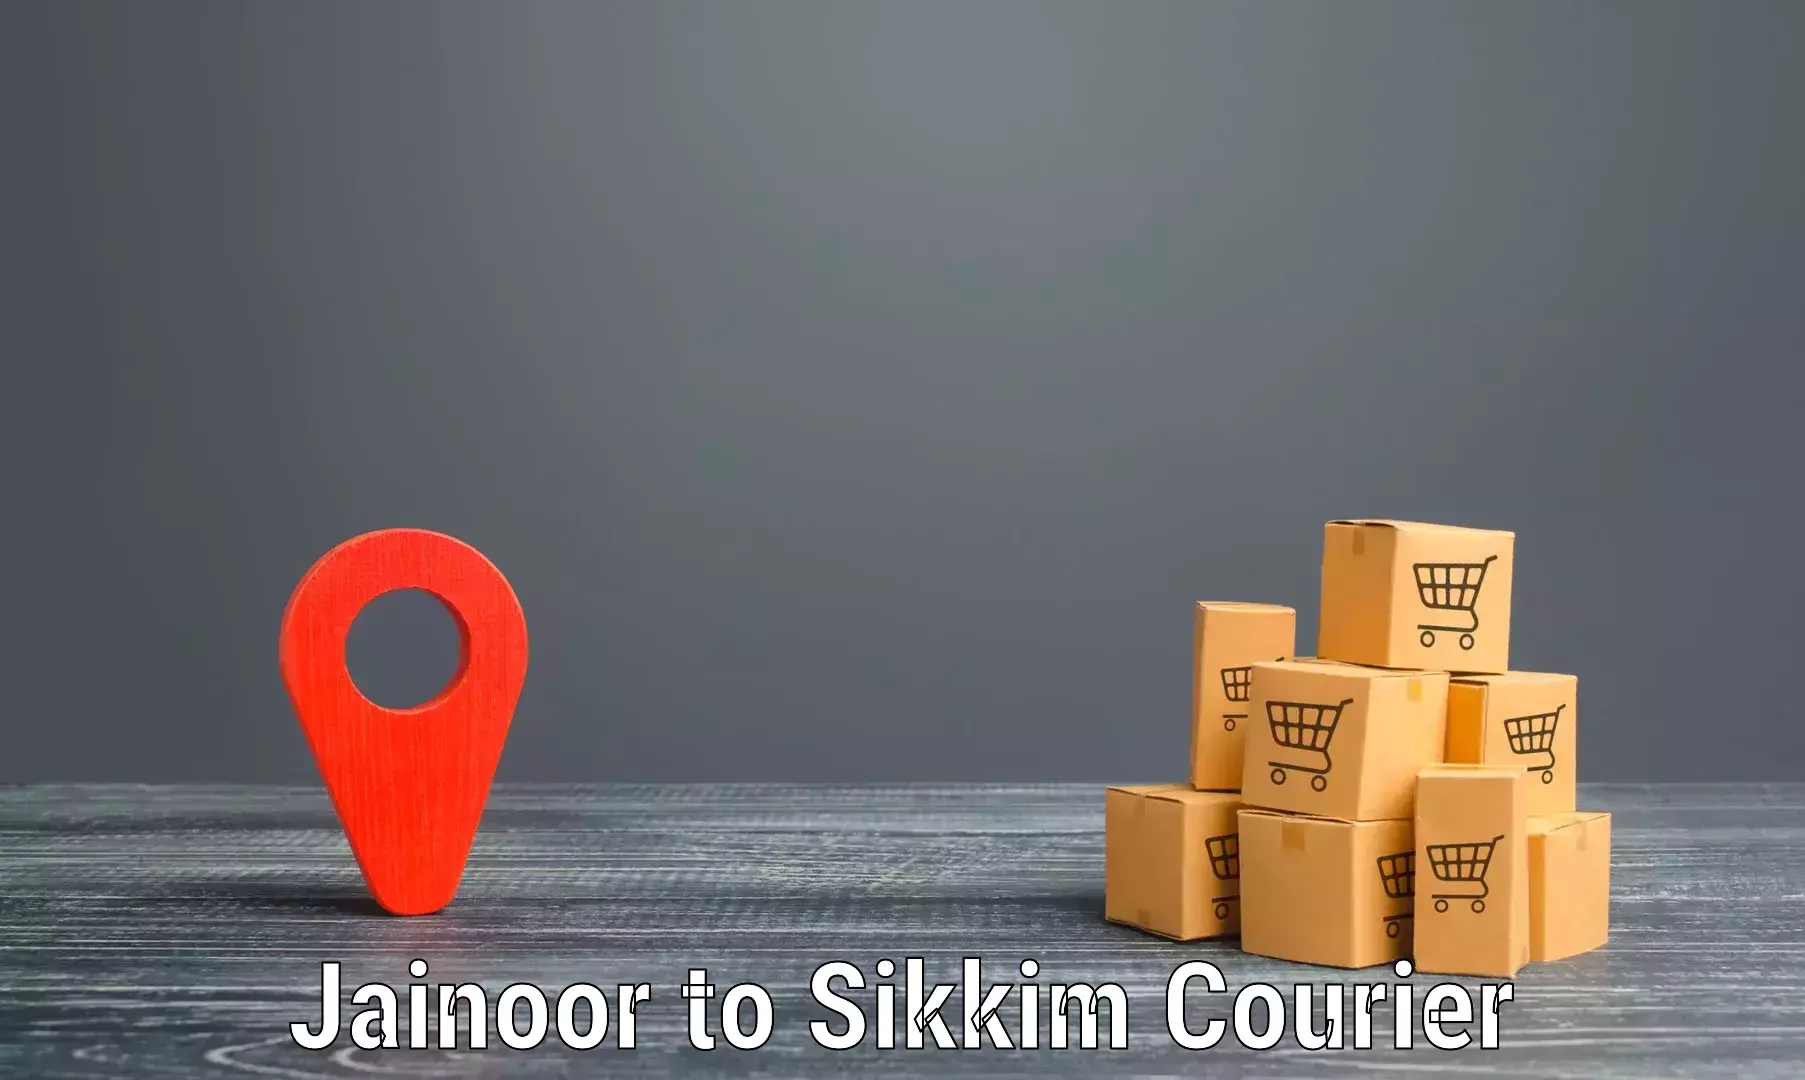 State-of-the-art courier technology Jainoor to South Sikkim